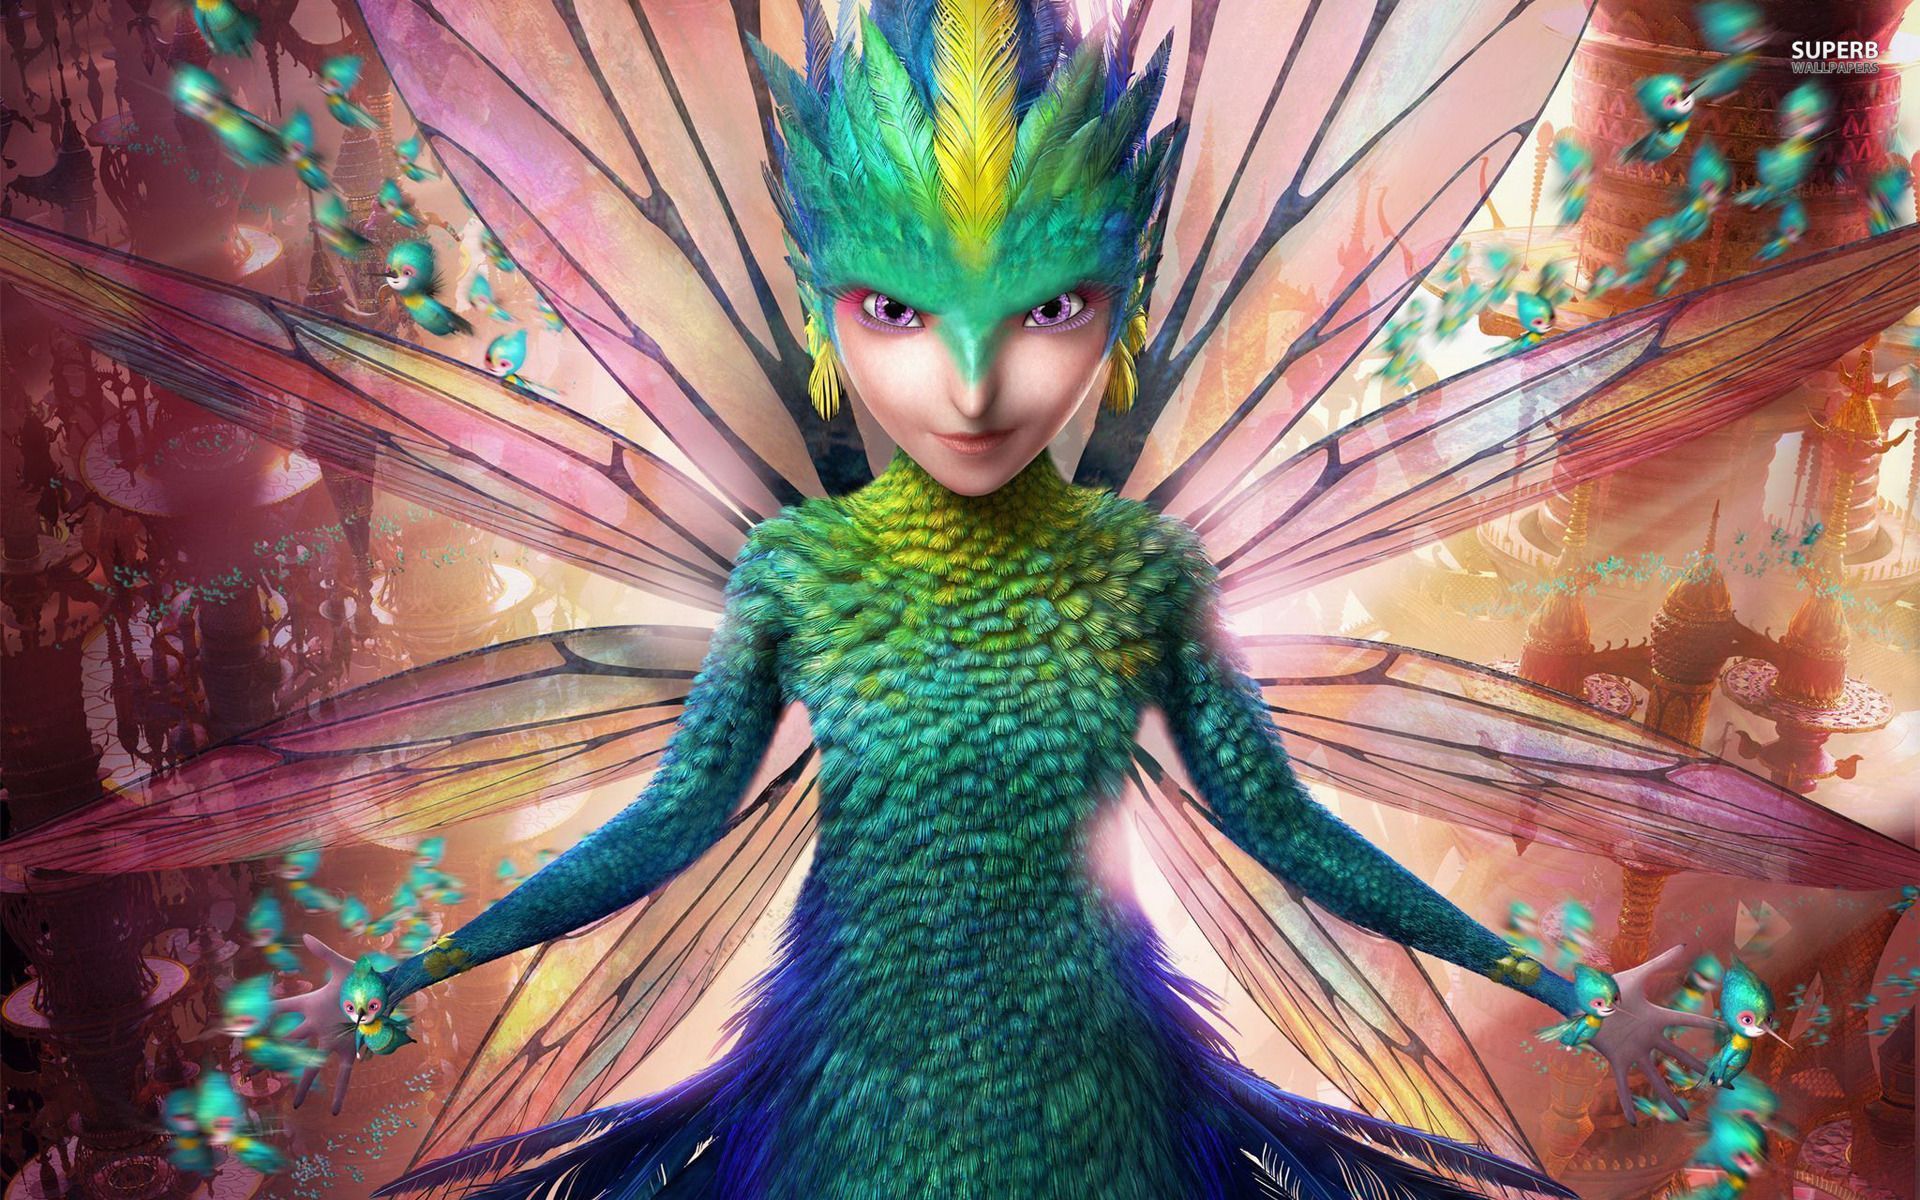 The Tooth Fairy of the Guardians wallpaper. Rise of the guardians, The guardian movie, Tooth fairy